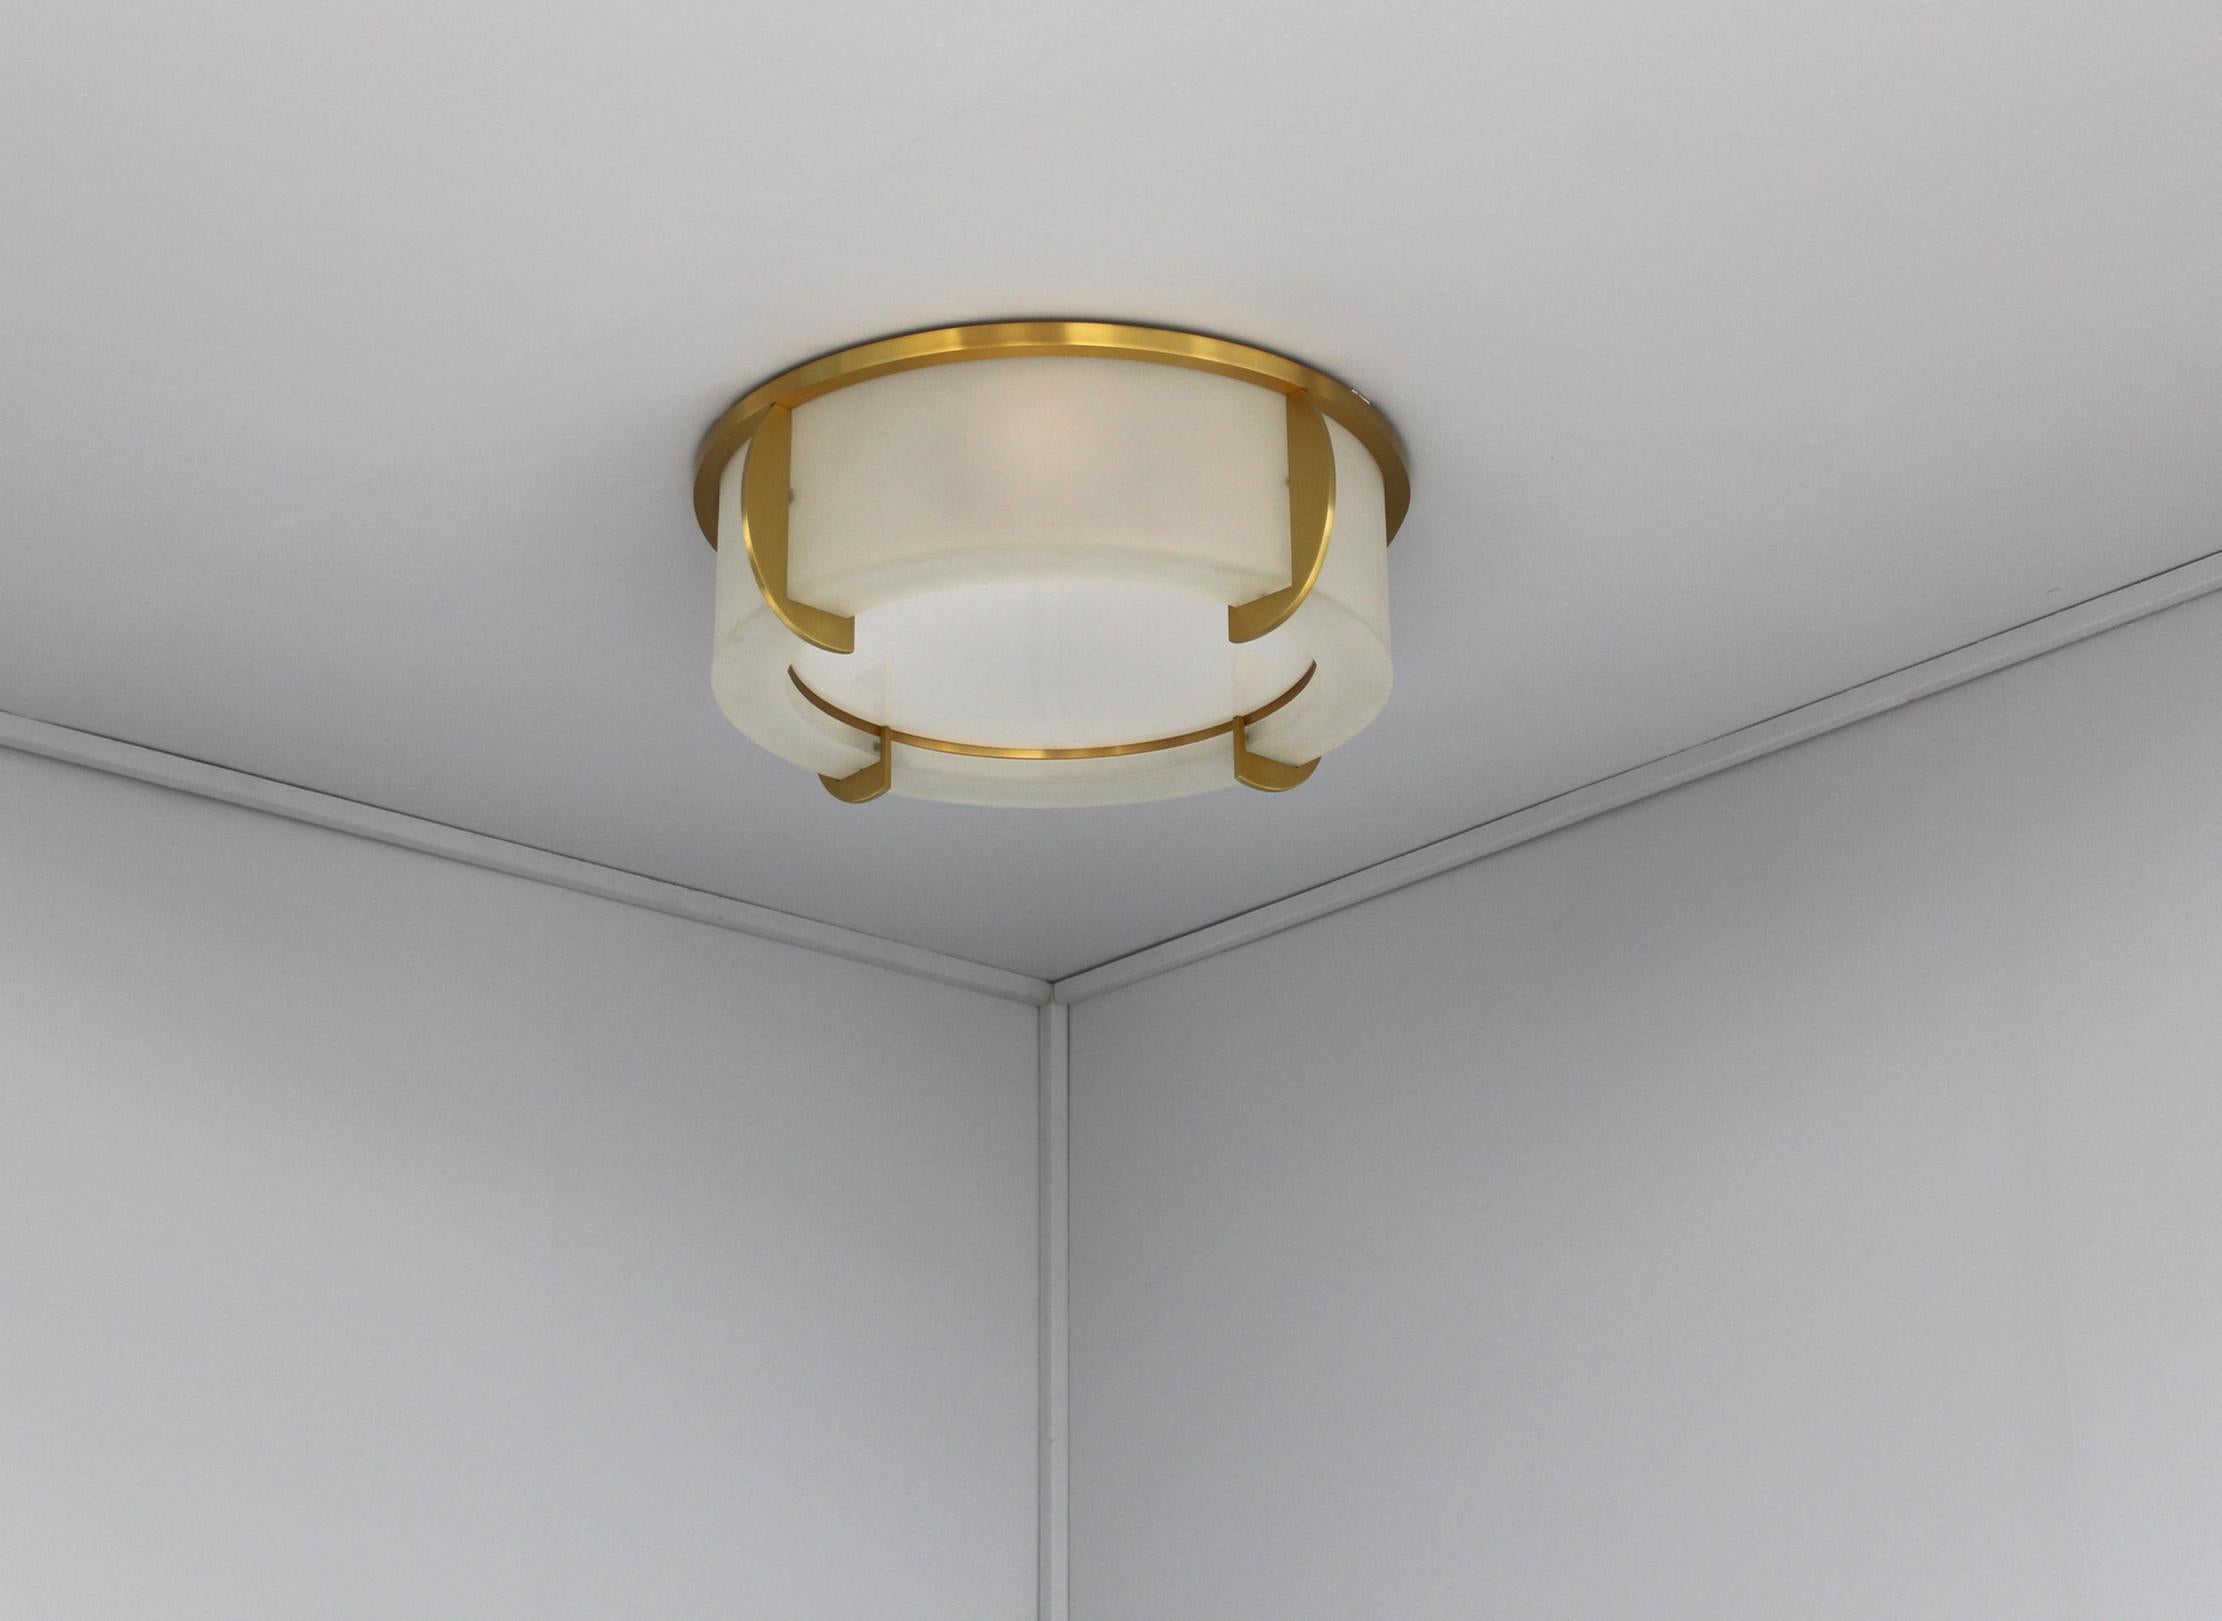 Mounted on a bronze crown-shaped frame that holds the frosted glass diffusers. The horizontal round enameled white glass diffuser is removable in order to change the bulbs.

 